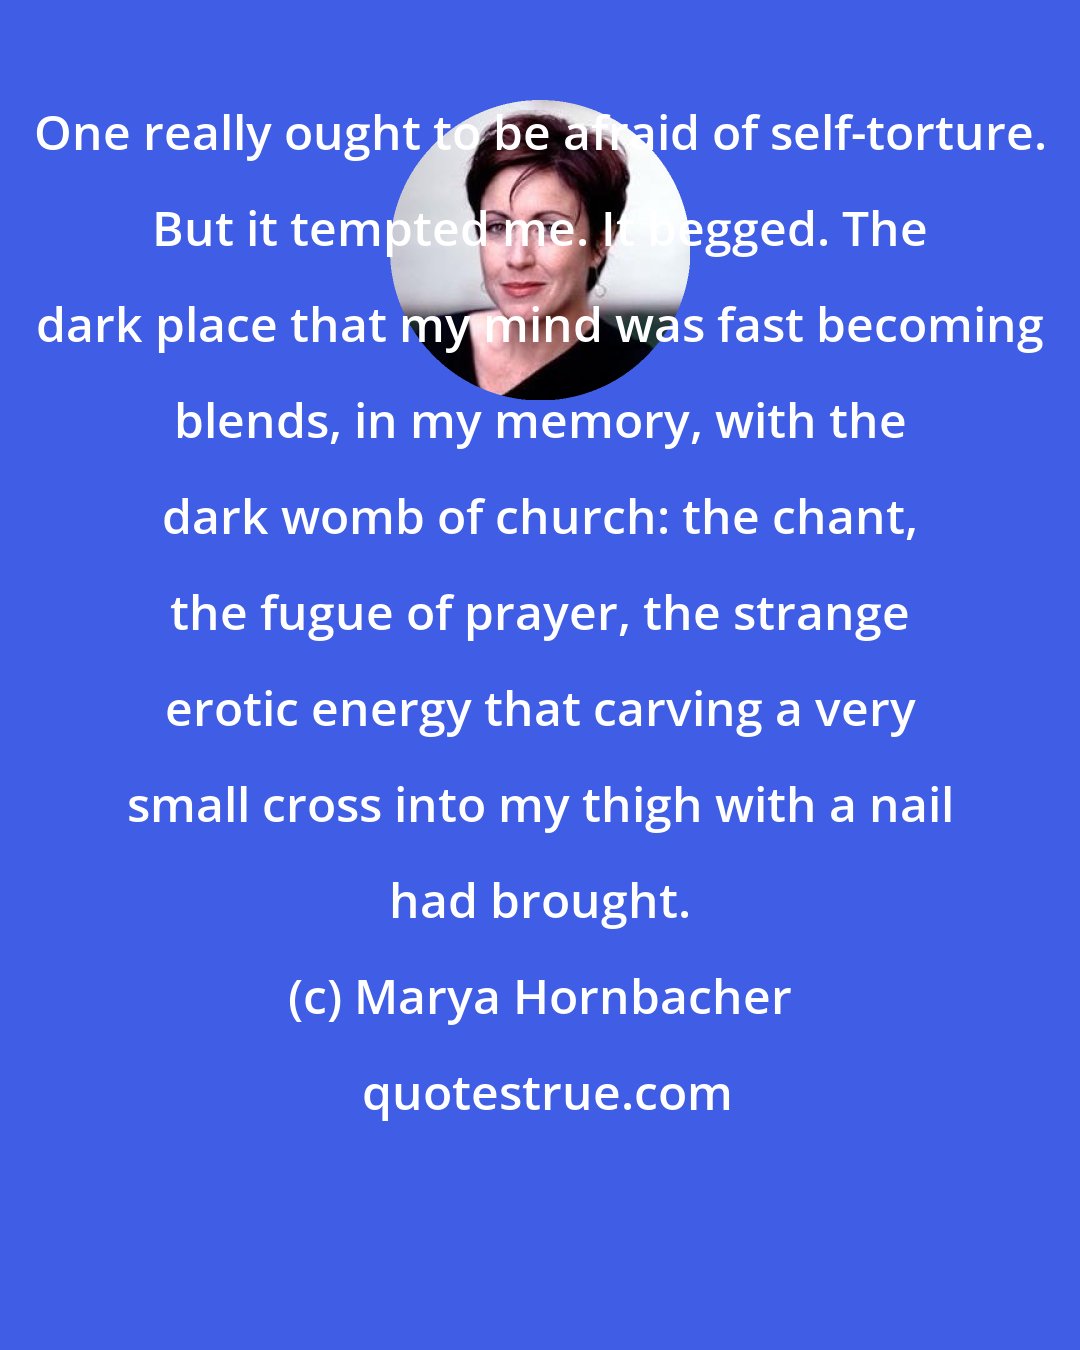 Marya Hornbacher: One really ought to be afraid of self-torture. But it tempted me. It begged. The dark place that my mind was fast becoming blends, in my memory, with the dark womb of church: the chant, the fugue of prayer, the strange erotic energy that carving a very small cross into my thigh with a nail had brought.